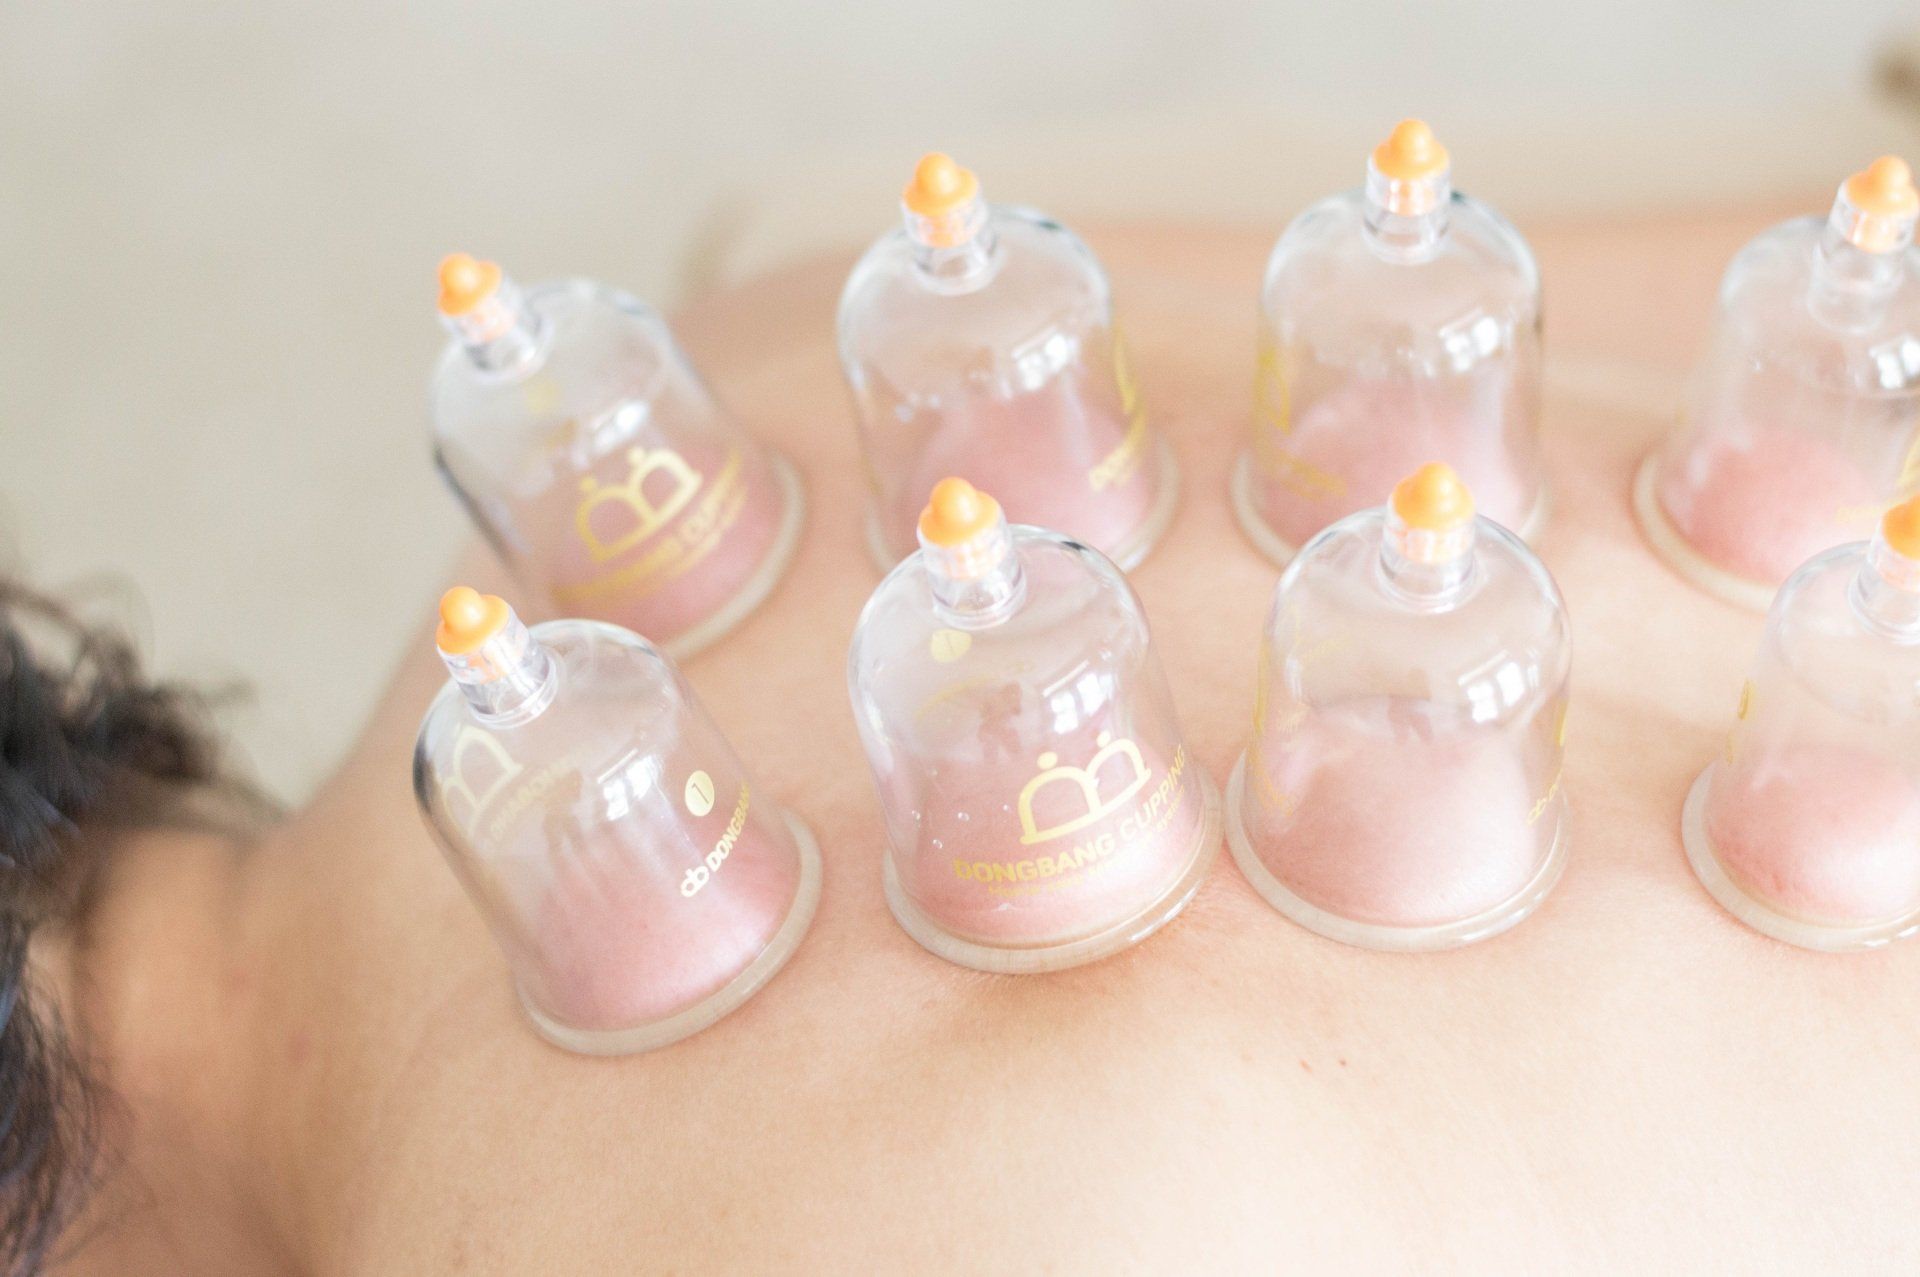 cupping massage cups therapeutisch